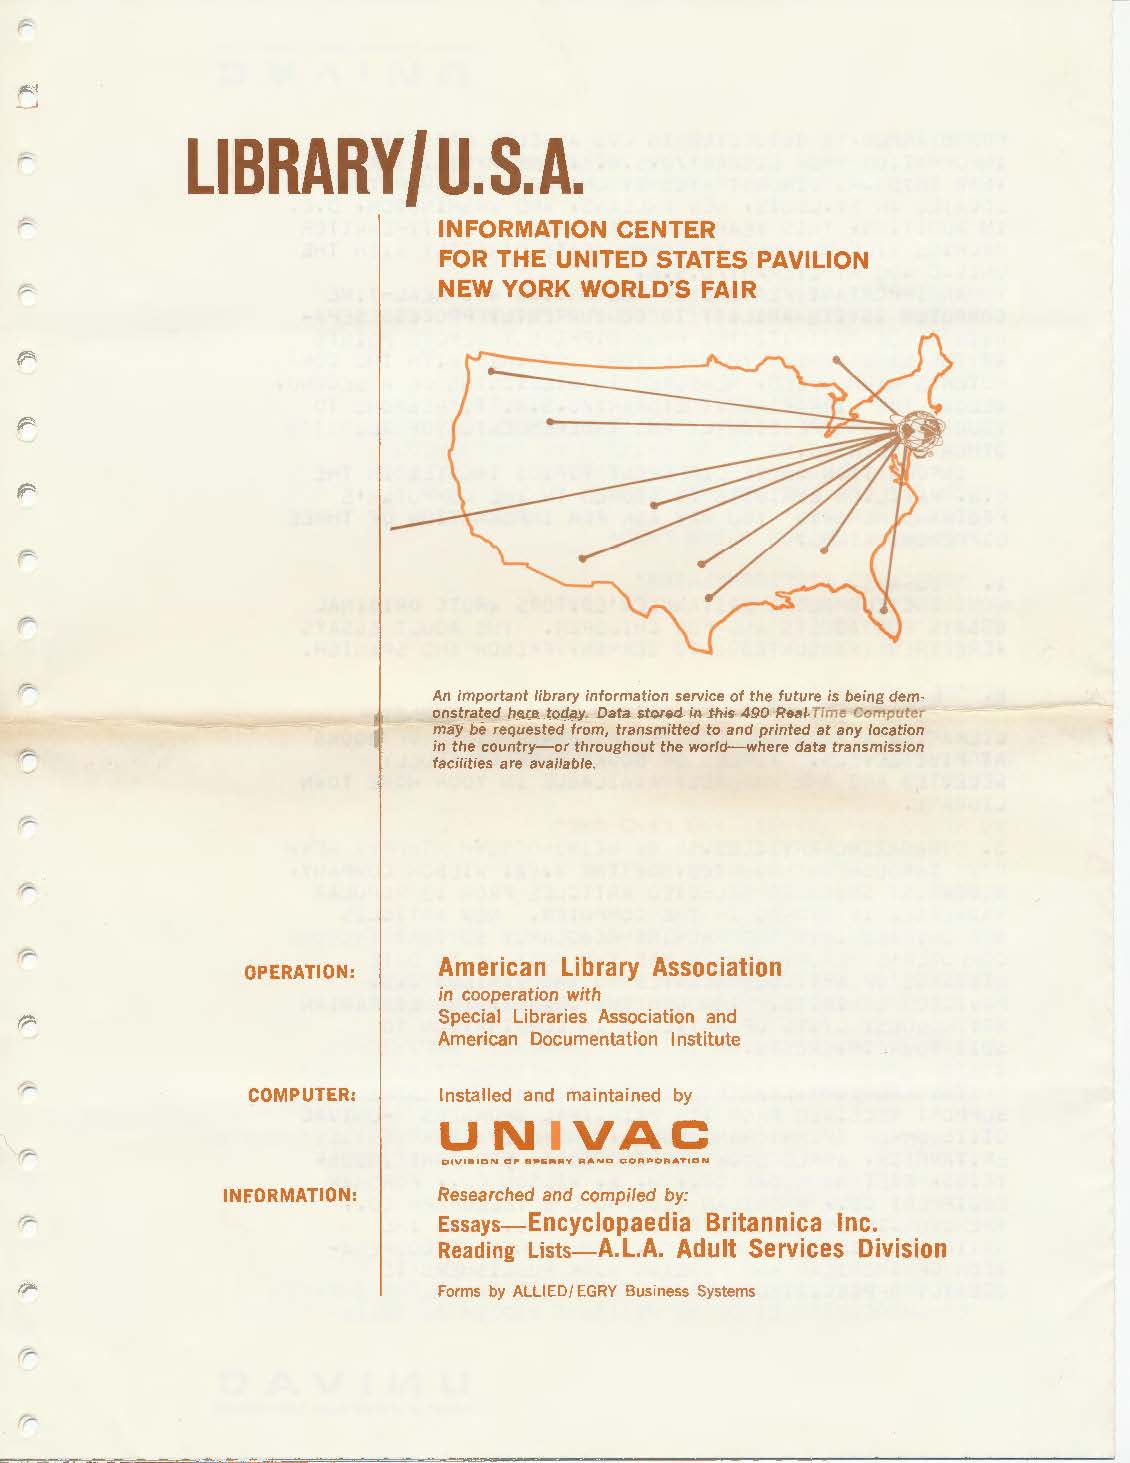 Cover of the Library Information Center printout